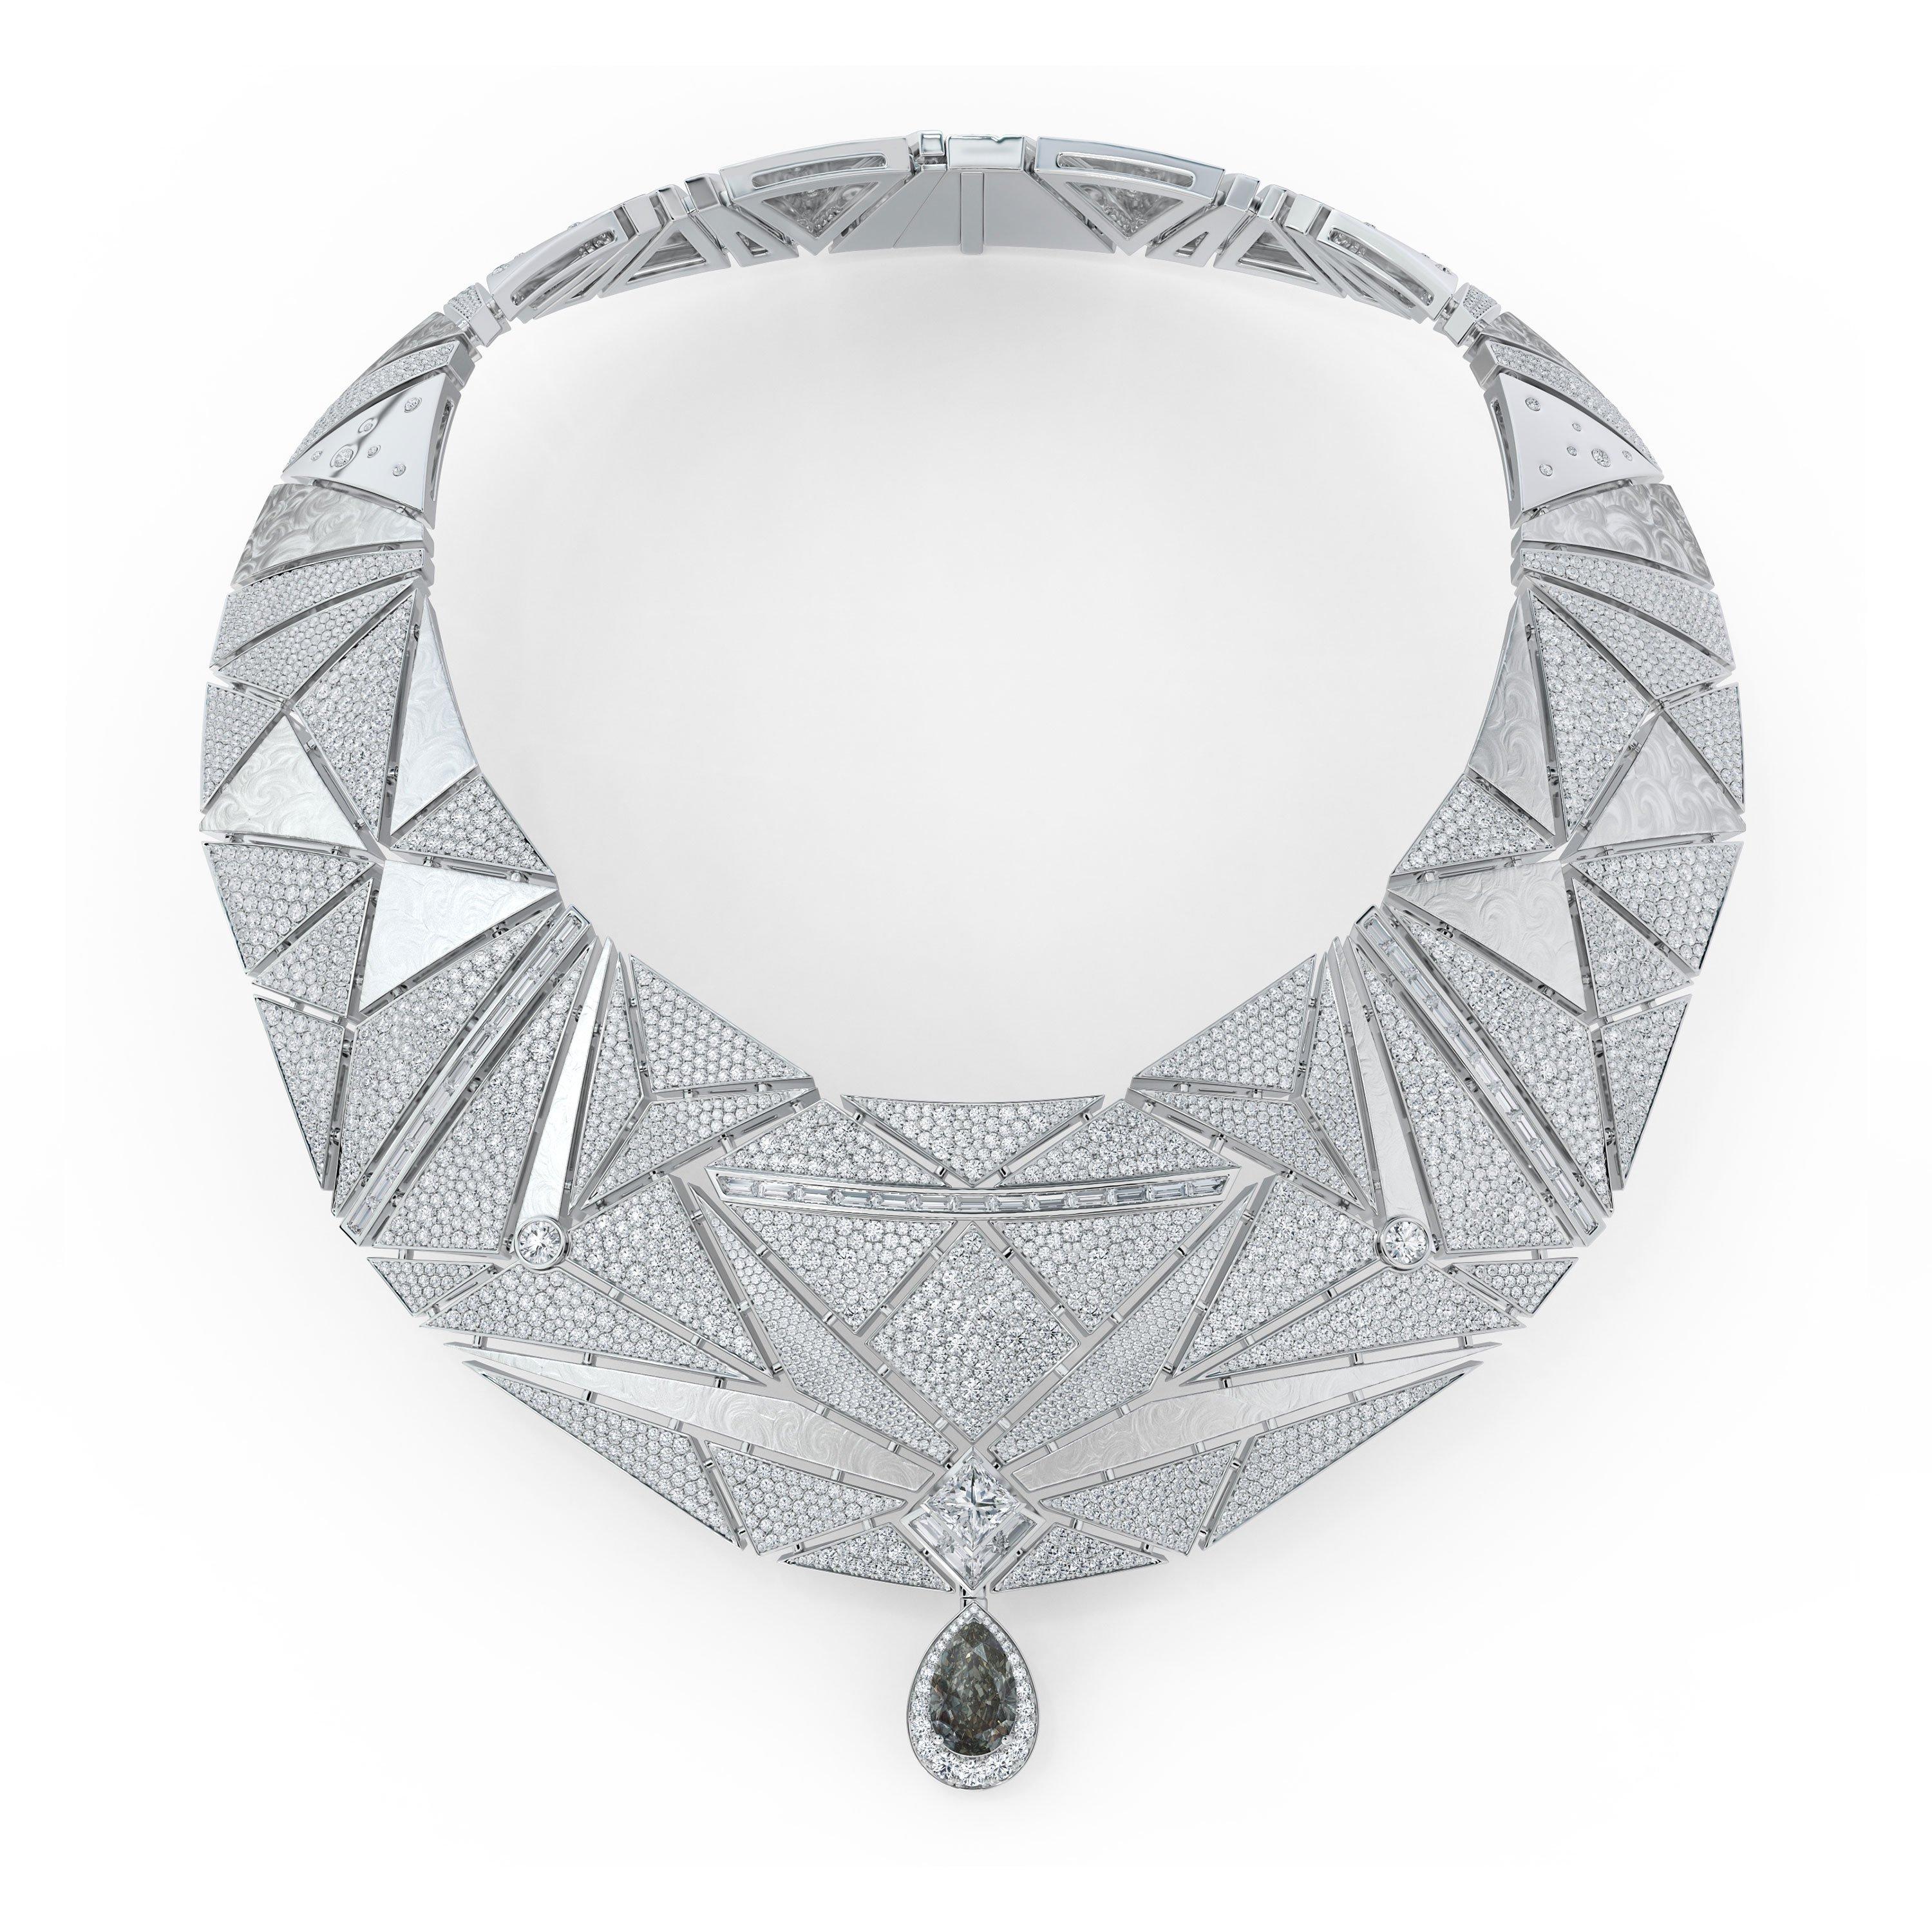 Soothing Lotus rough and cut diamond necklace, De Beers